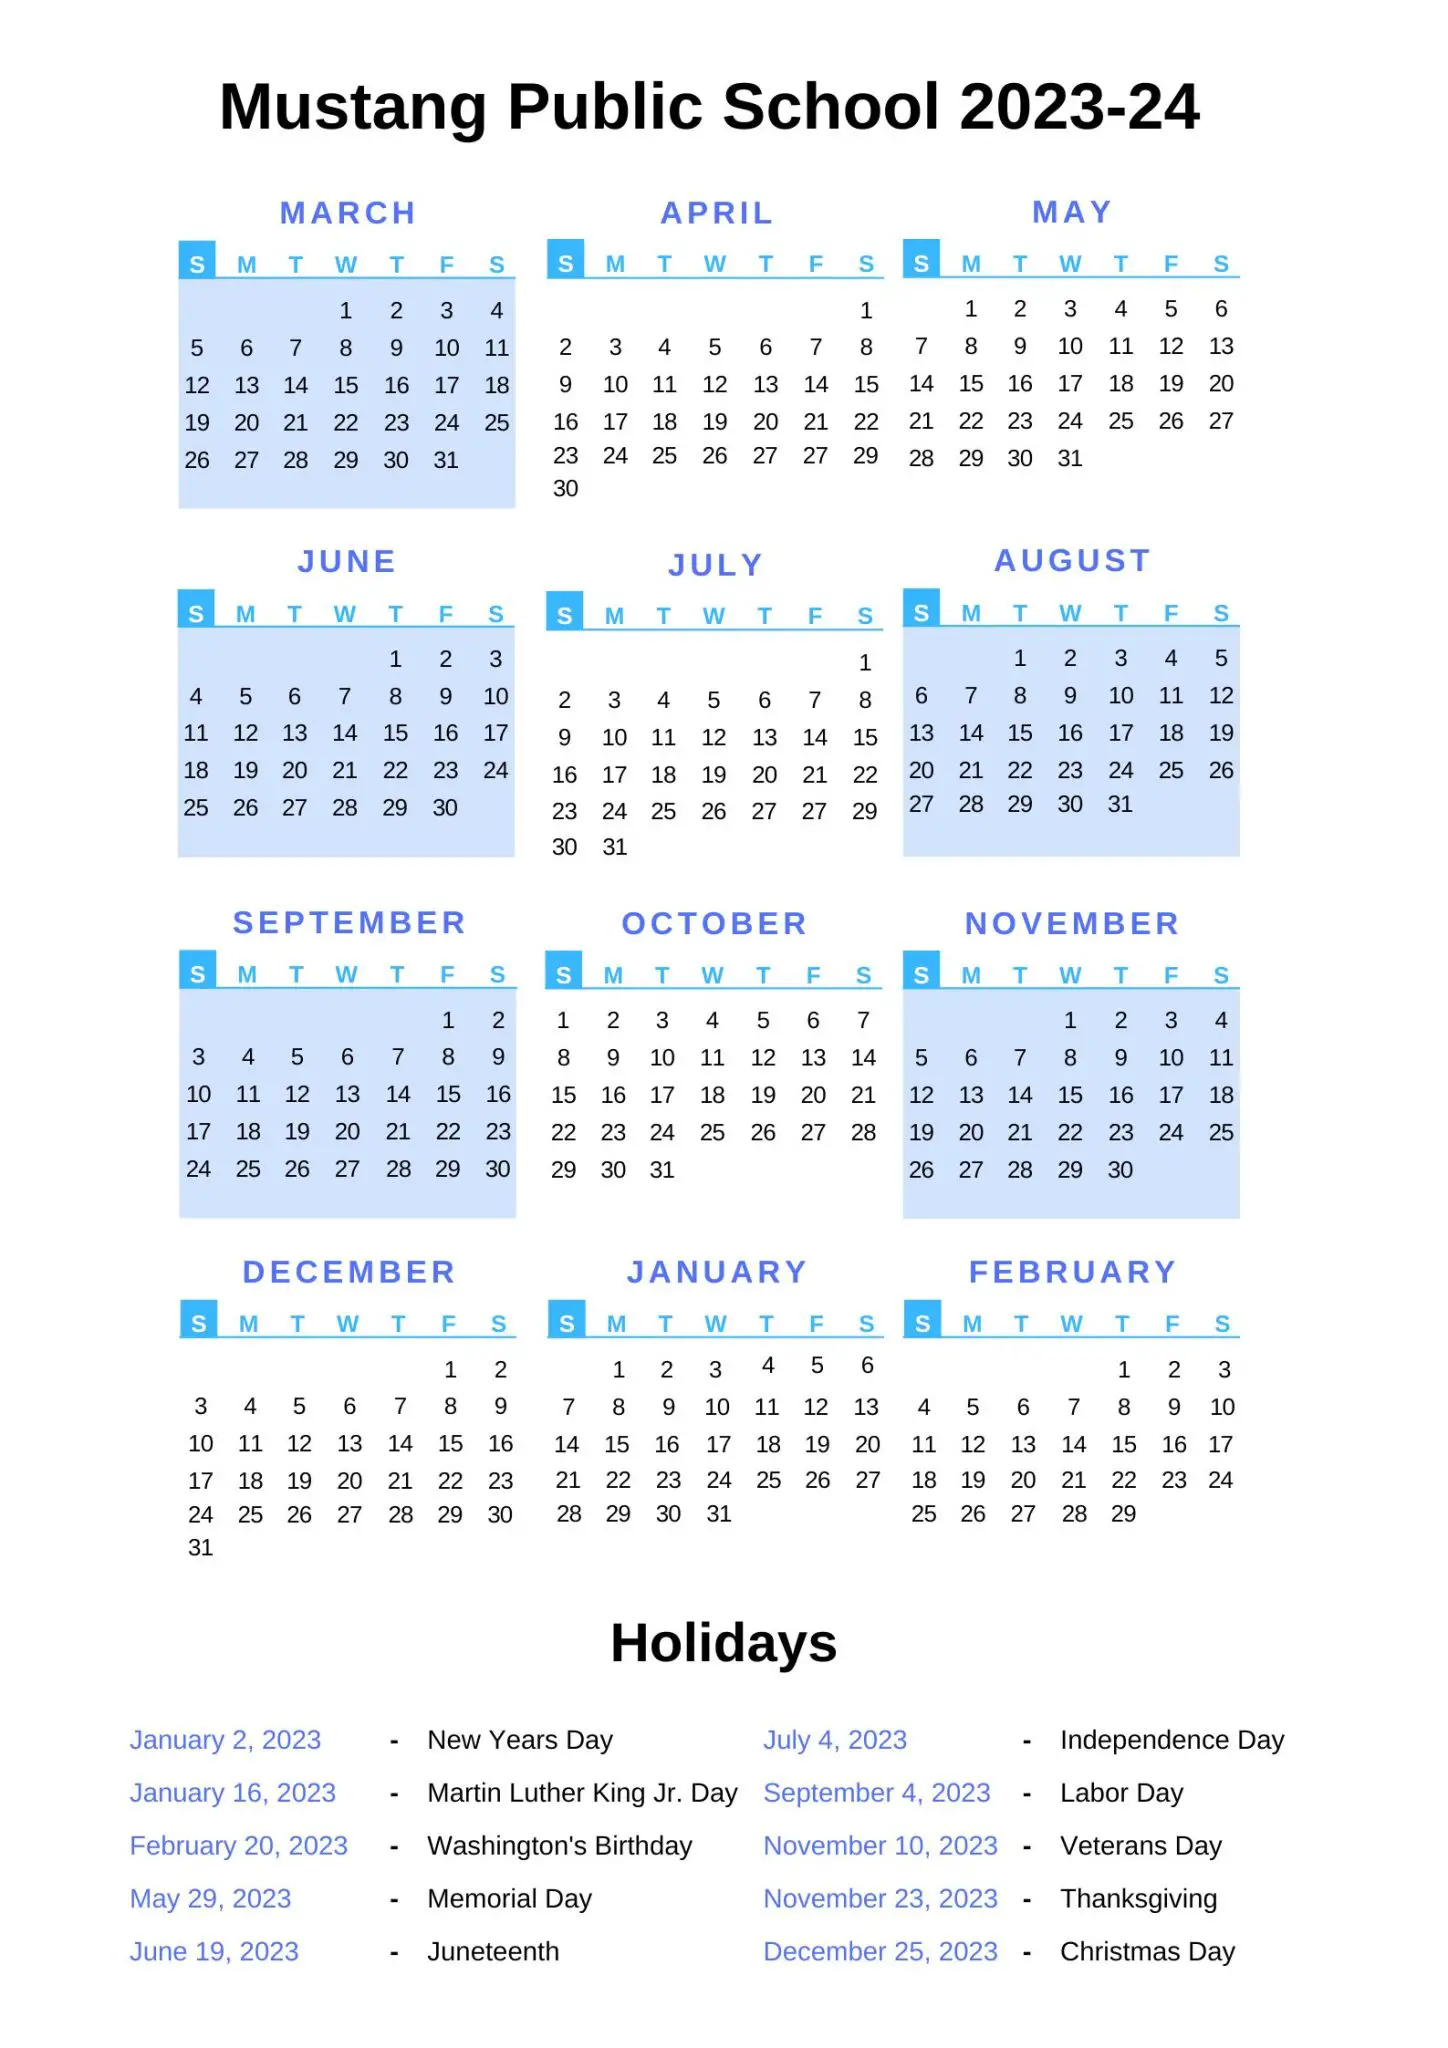 Mustang Public Schools Calendar [MPS] 202324 With Holidays